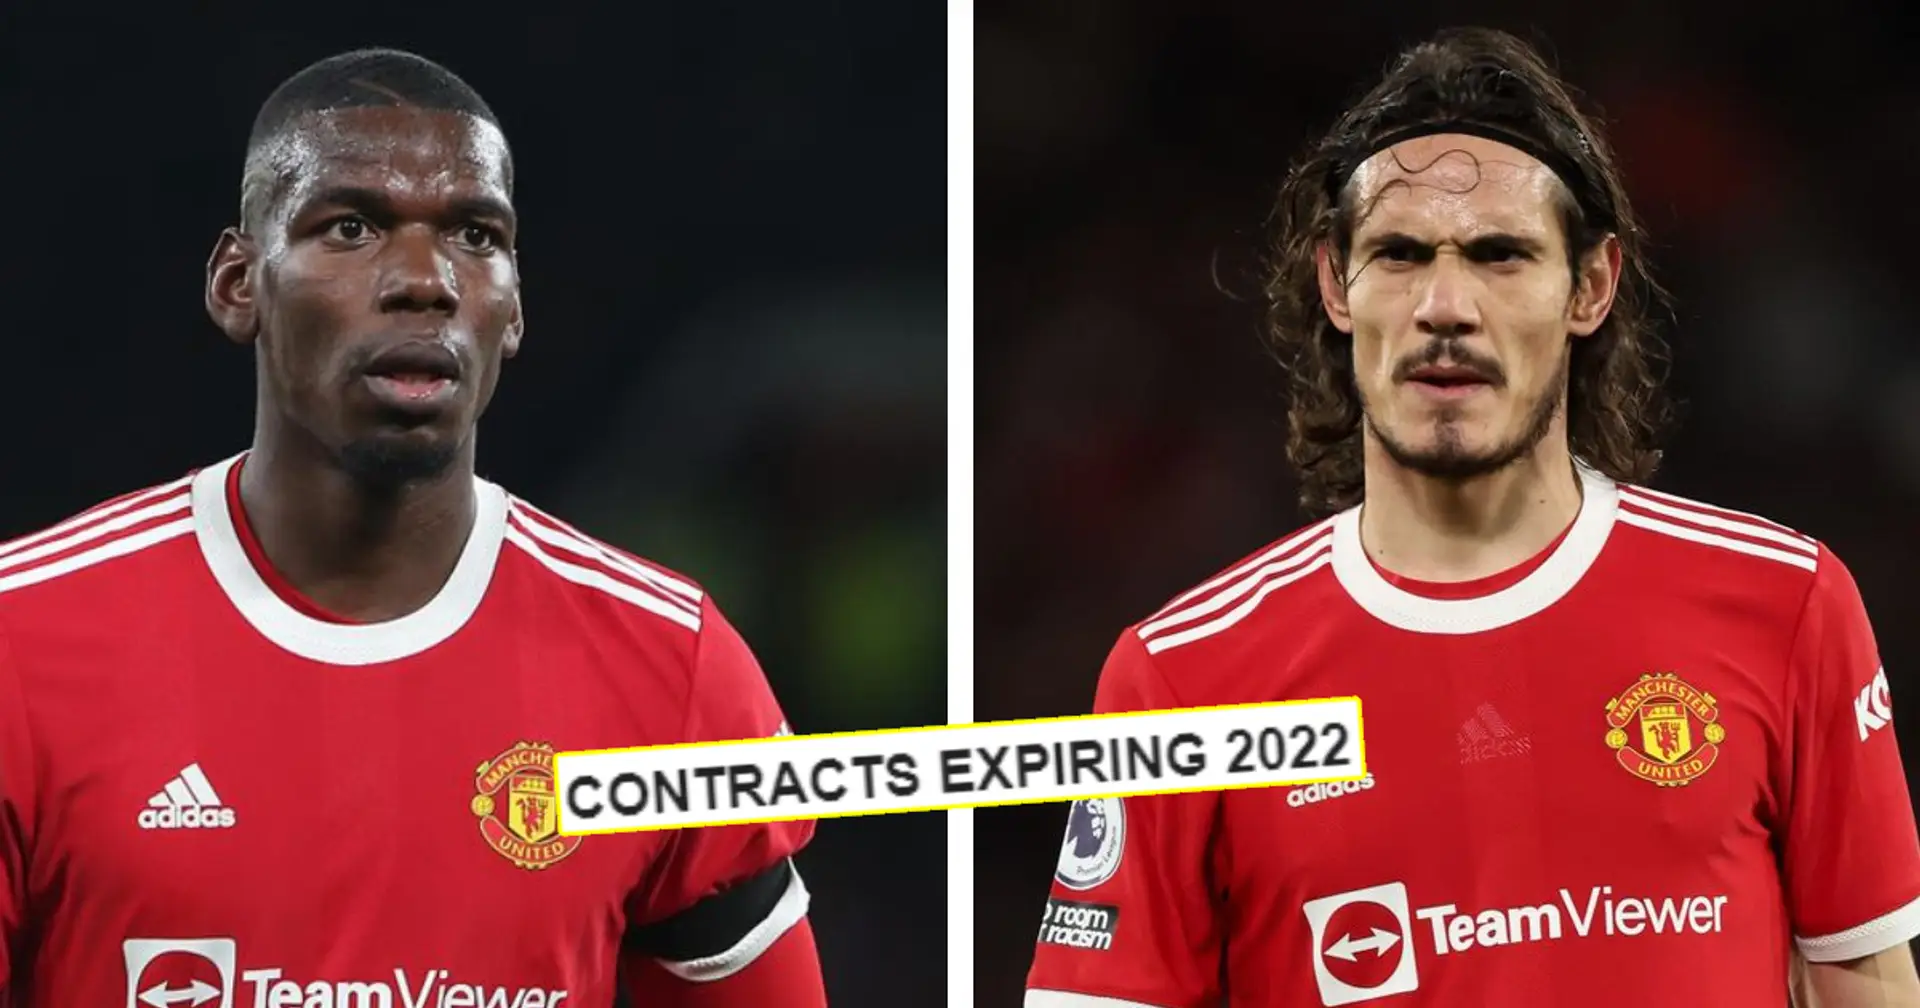 6 players could leave Old Trafford as free agents in summer: Latest Man United contract round-up